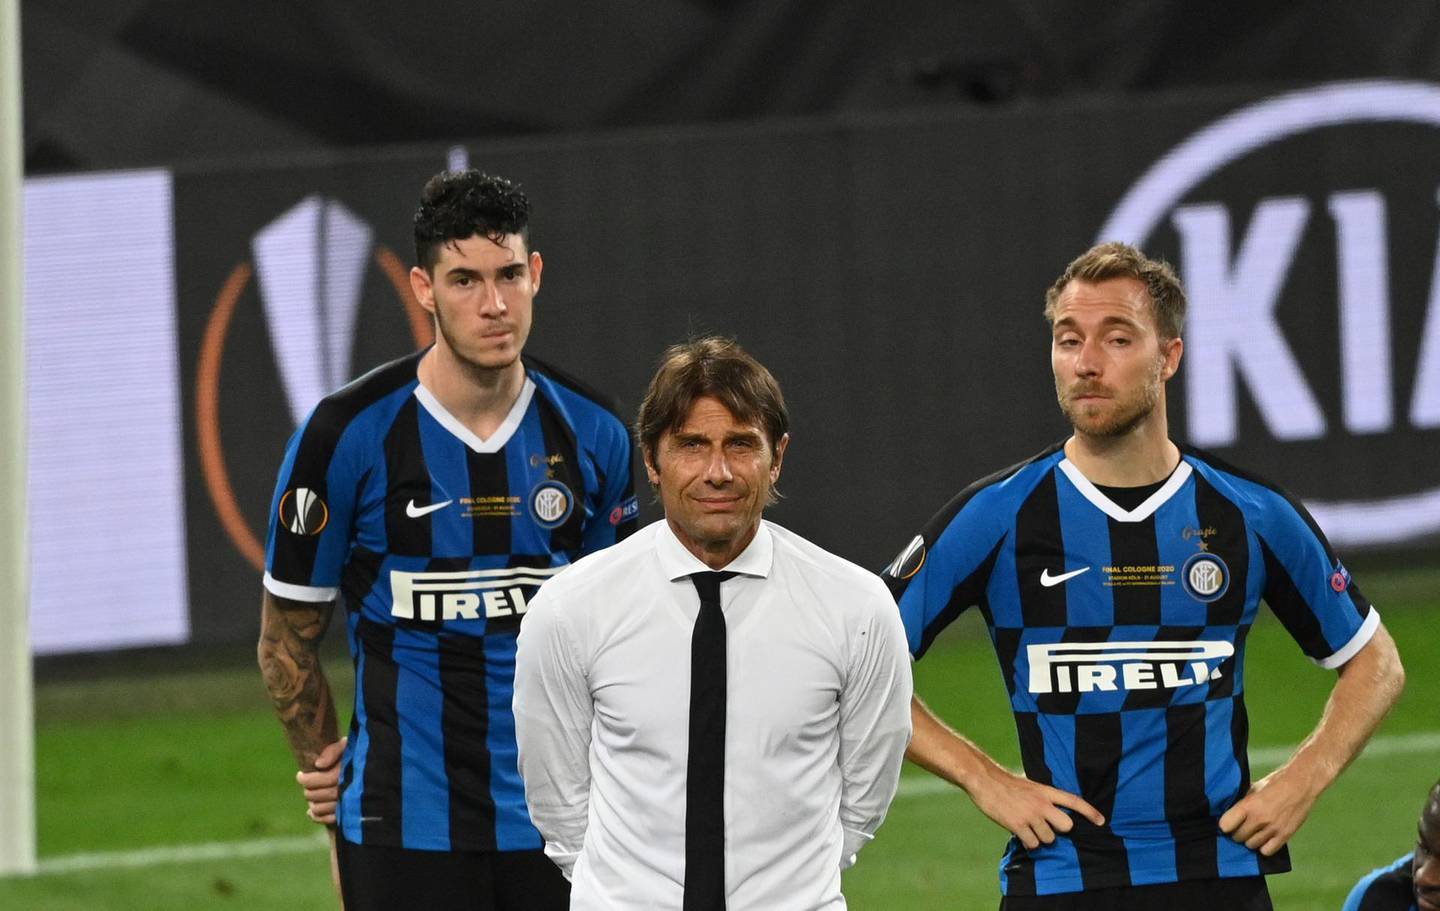 Inter Milan's head coach Antonio Conte, centre, and players react after the Europa League final soccer match between Sevilla and Inter Milan in Cologne, Germany, Friday, Aug. 21, 2020. (Ina Fassbender/Pool via AP)